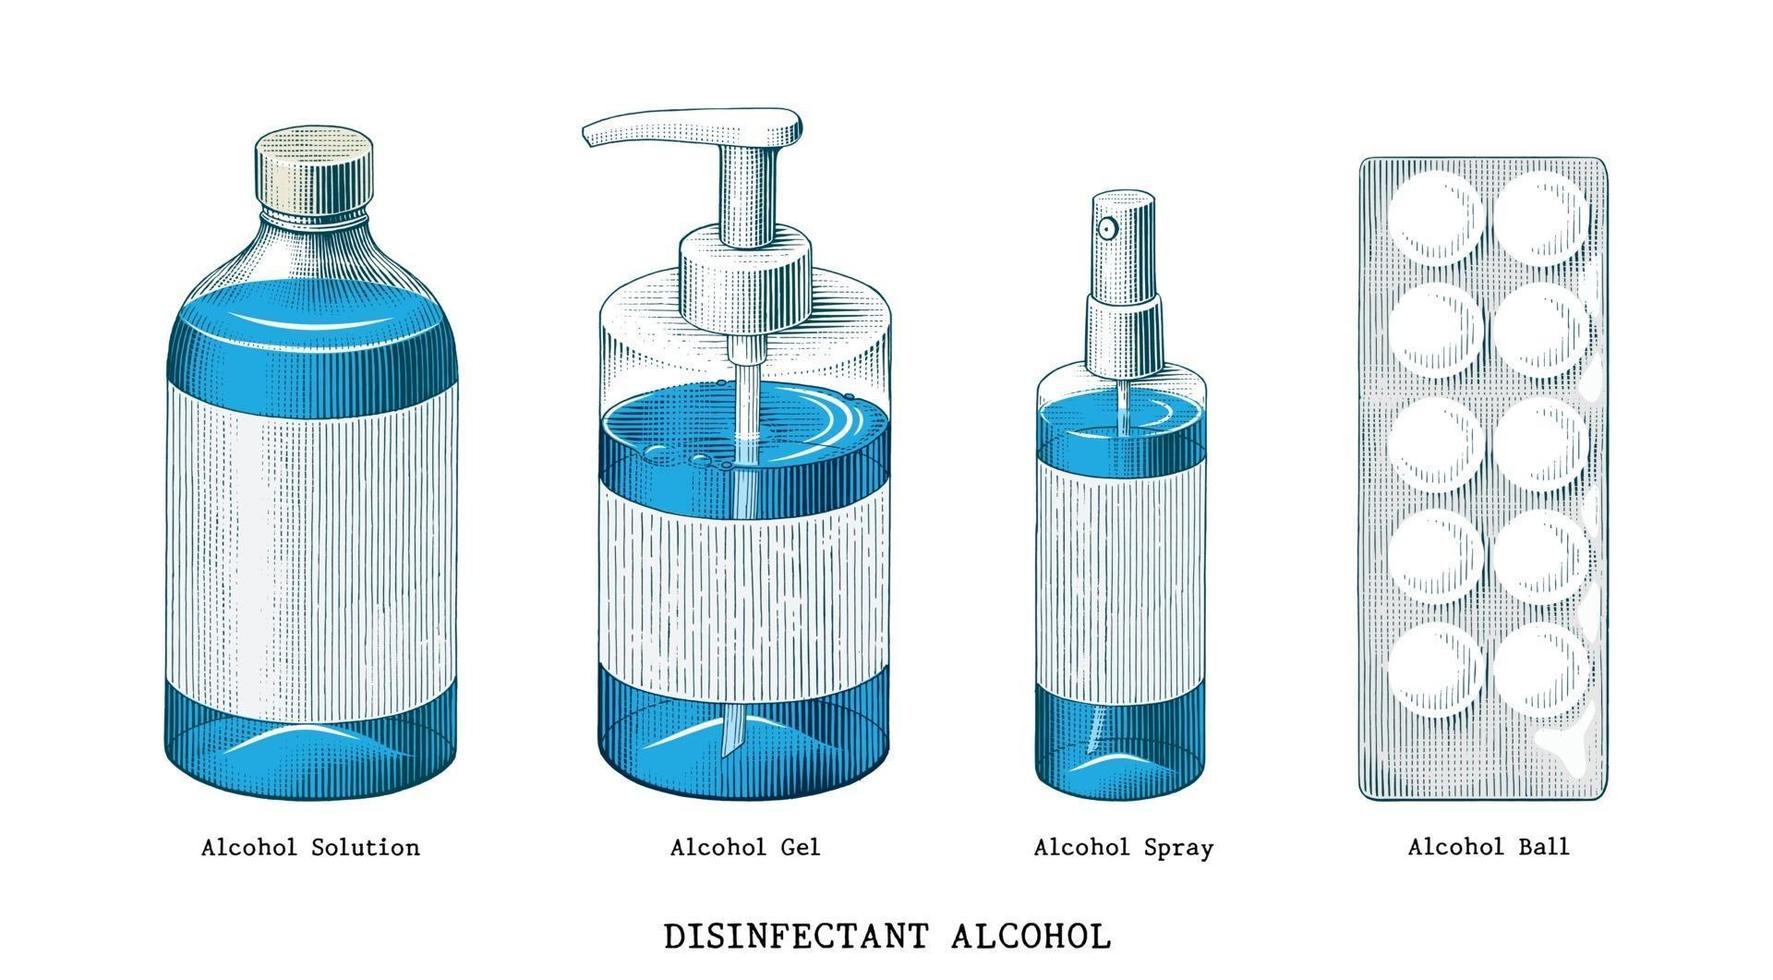 Disinfectant alcohol set hand drawn vintage style art isolated on white background vector